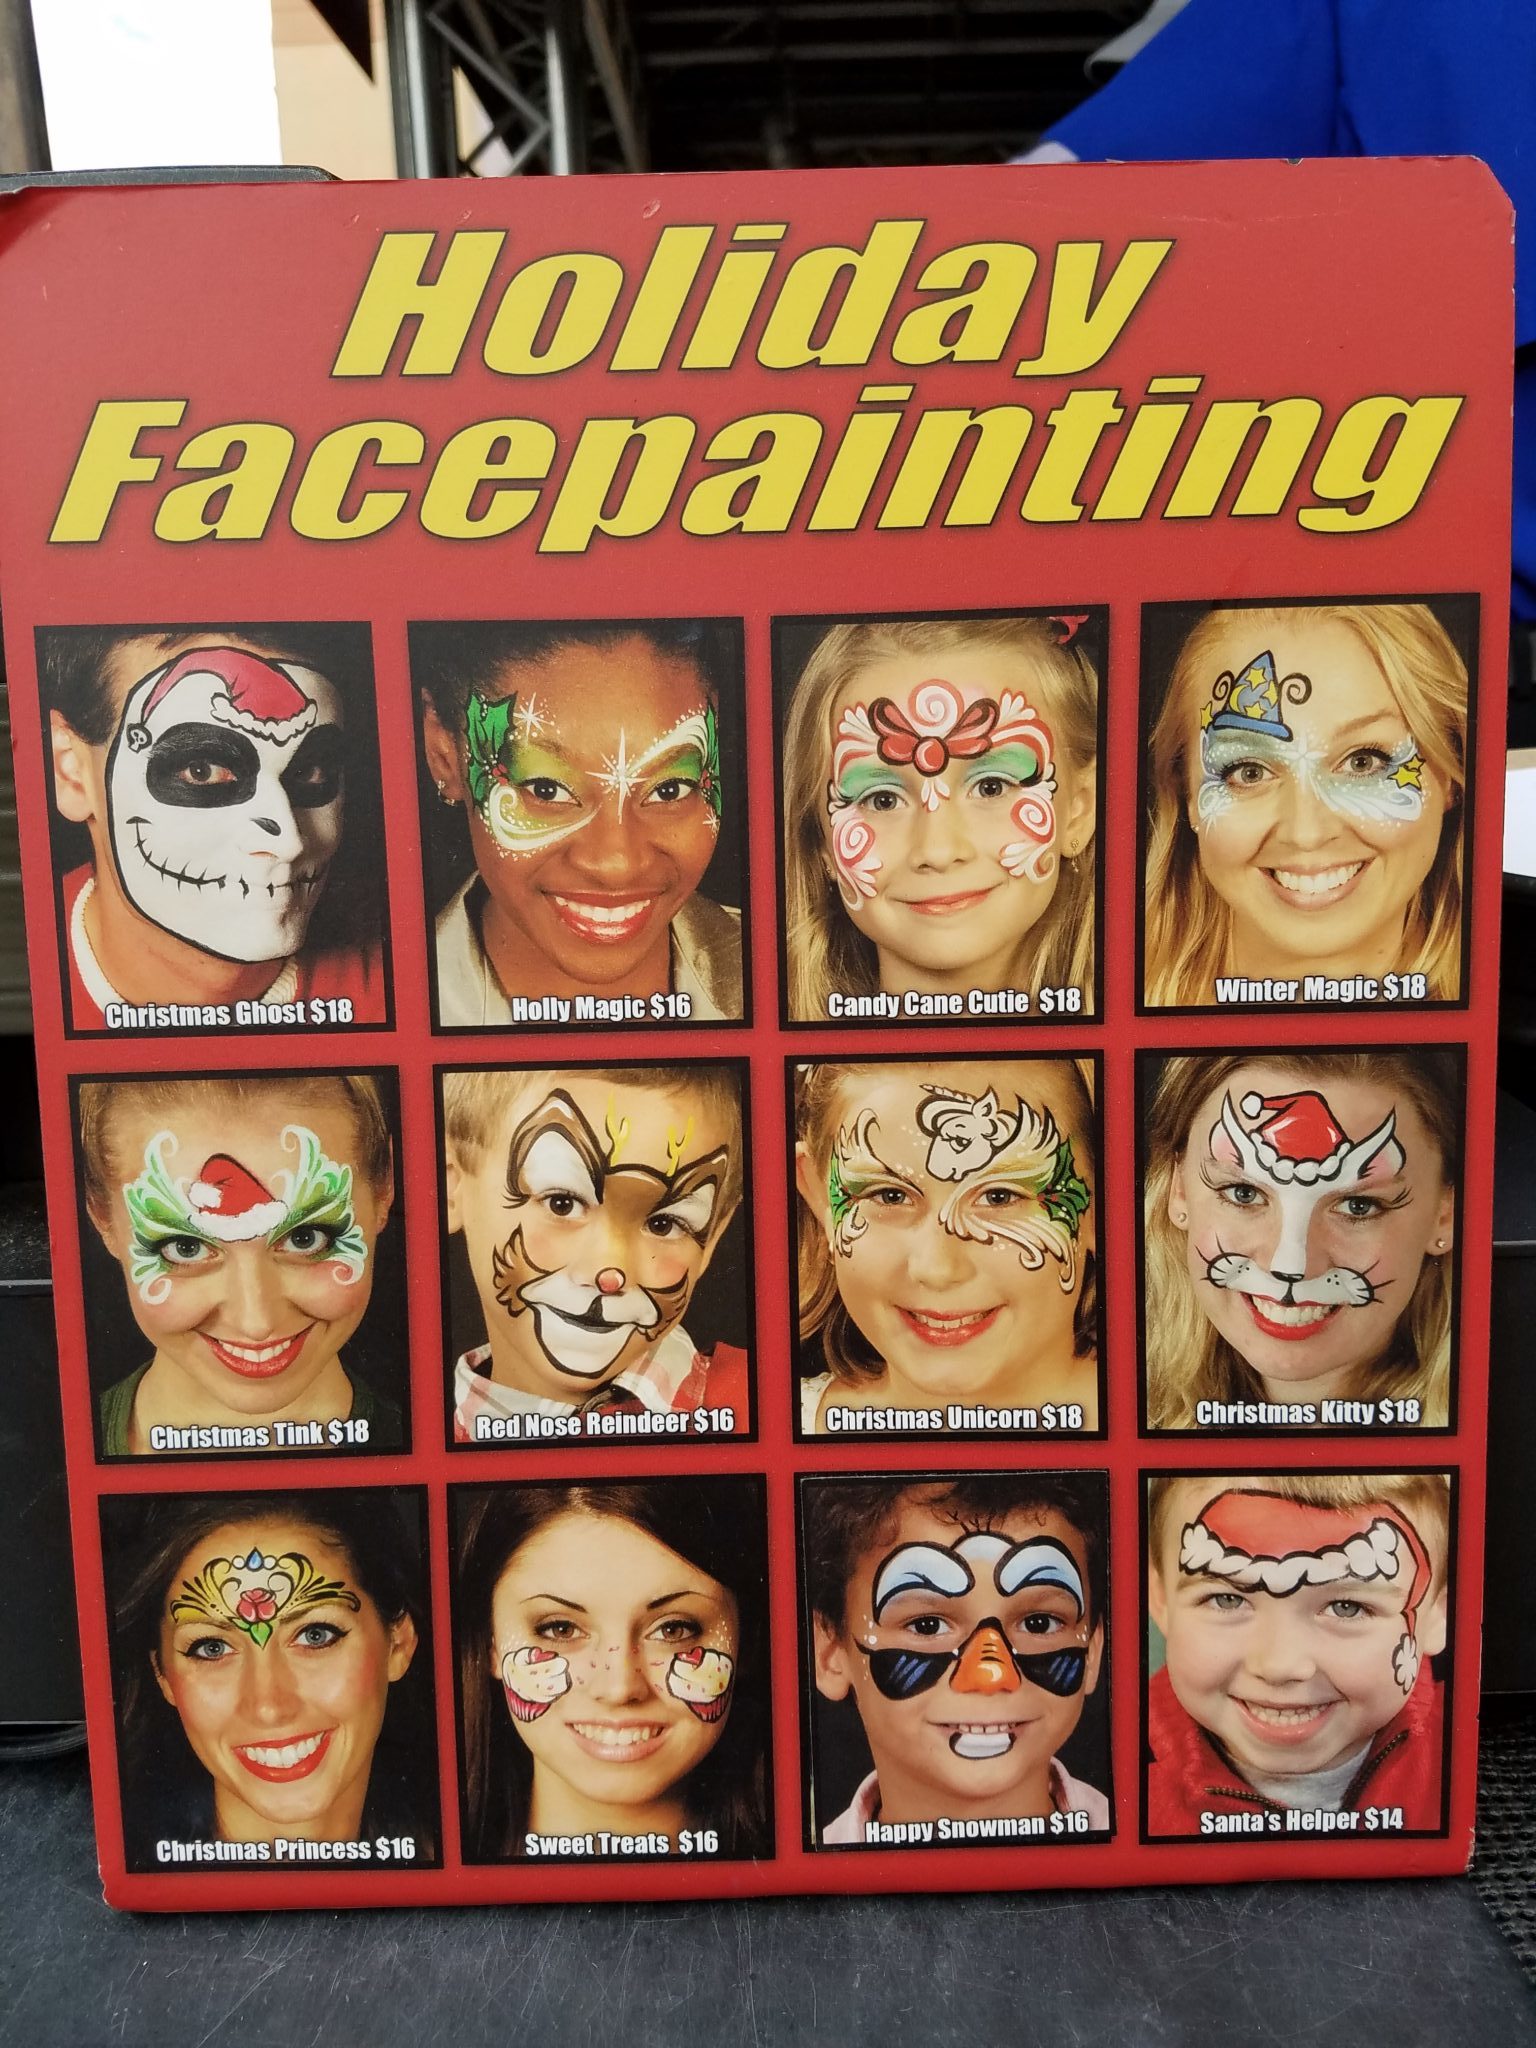 Holiday Face Painting Now Available At Disney’s Hollywood Studios